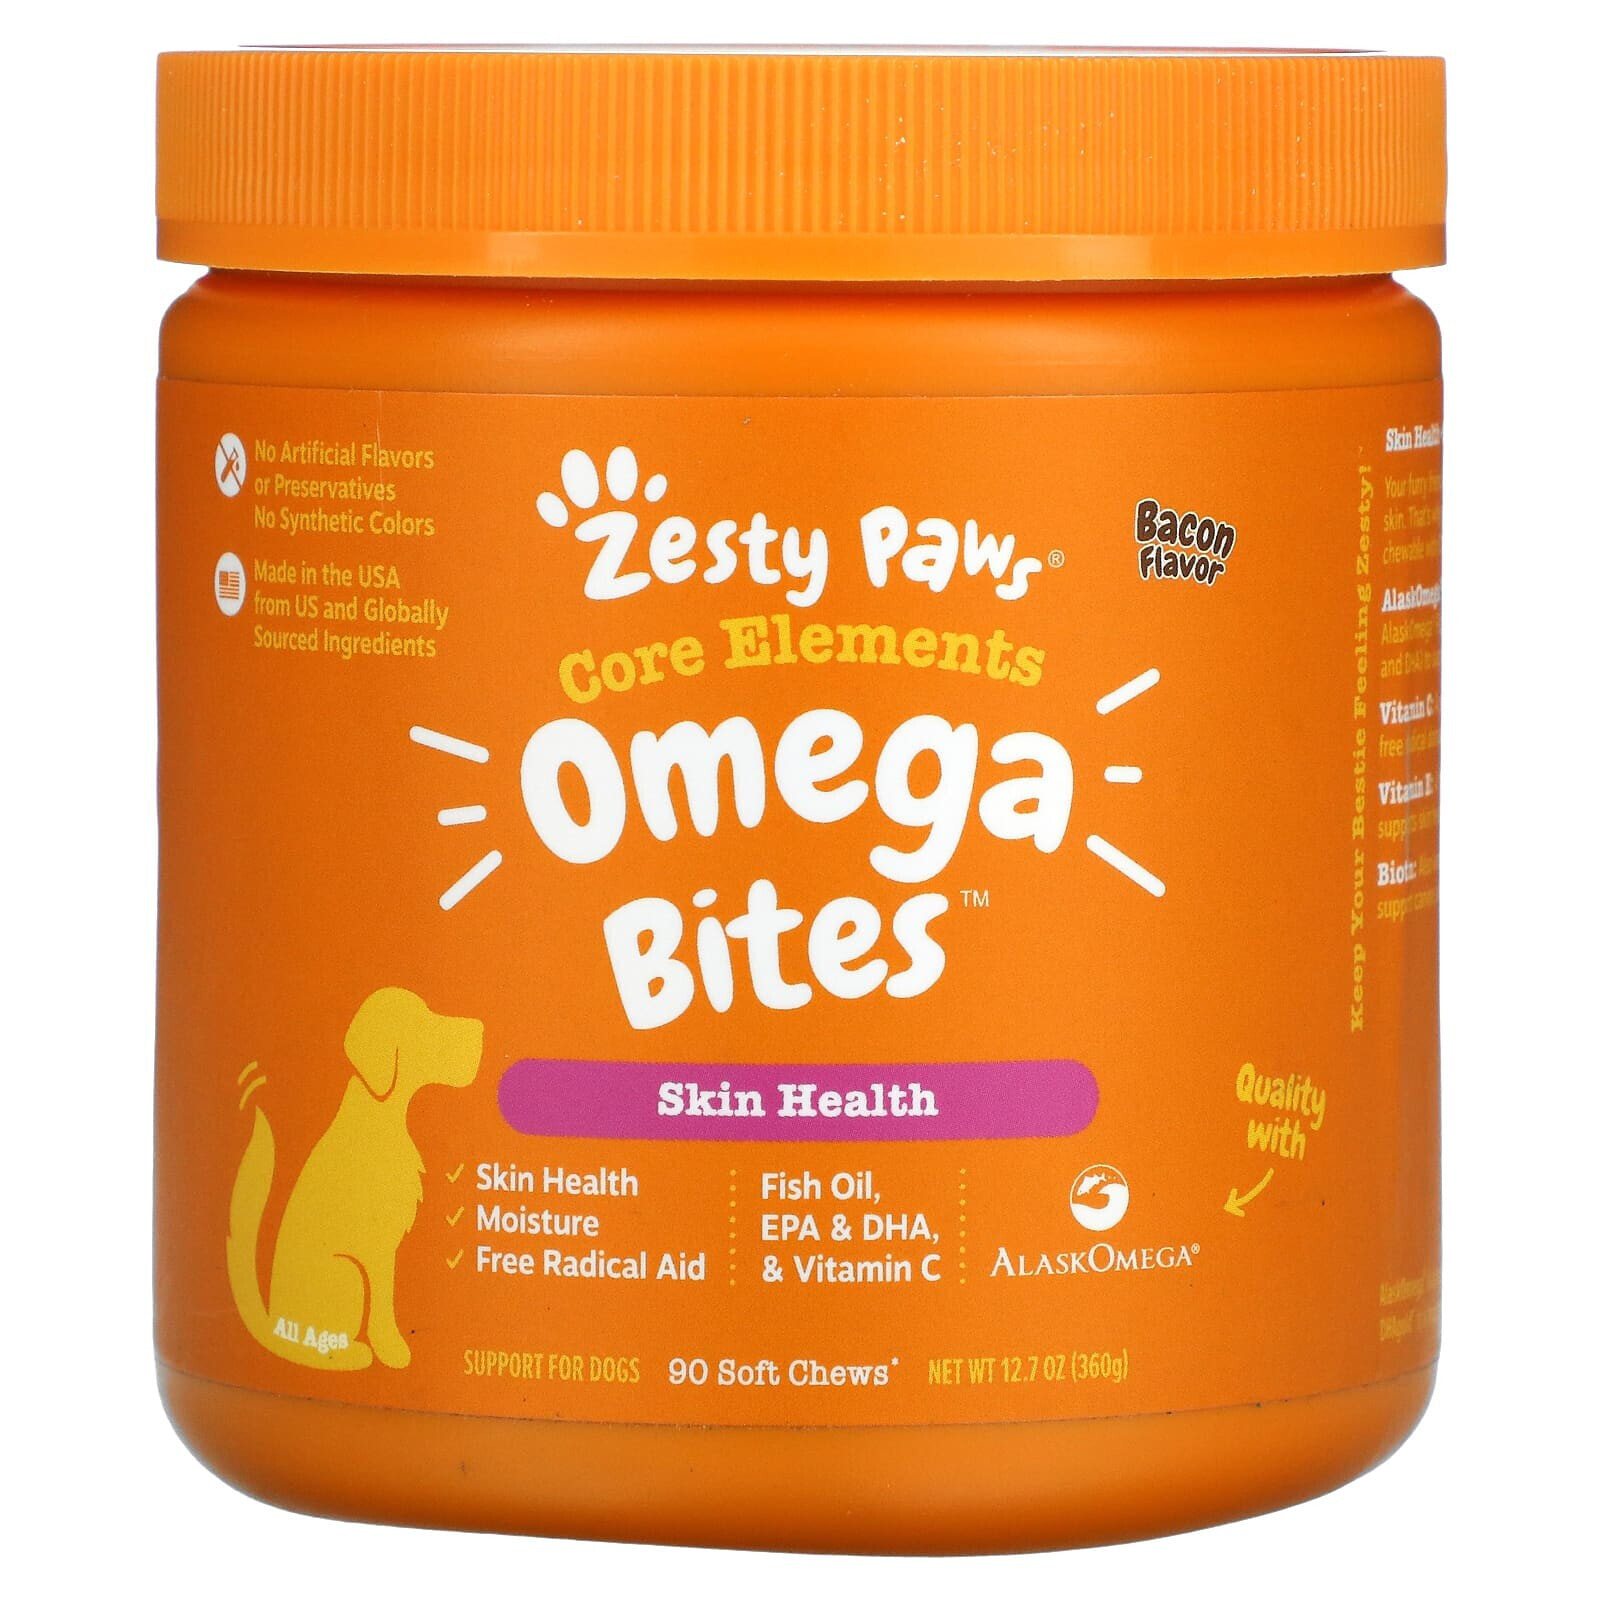 Zesty Paws, Omega Bites for Dogs, Skin & Coat, All Ages, Chicken, 90 Soft Chews, 12.7 oz (360 g)